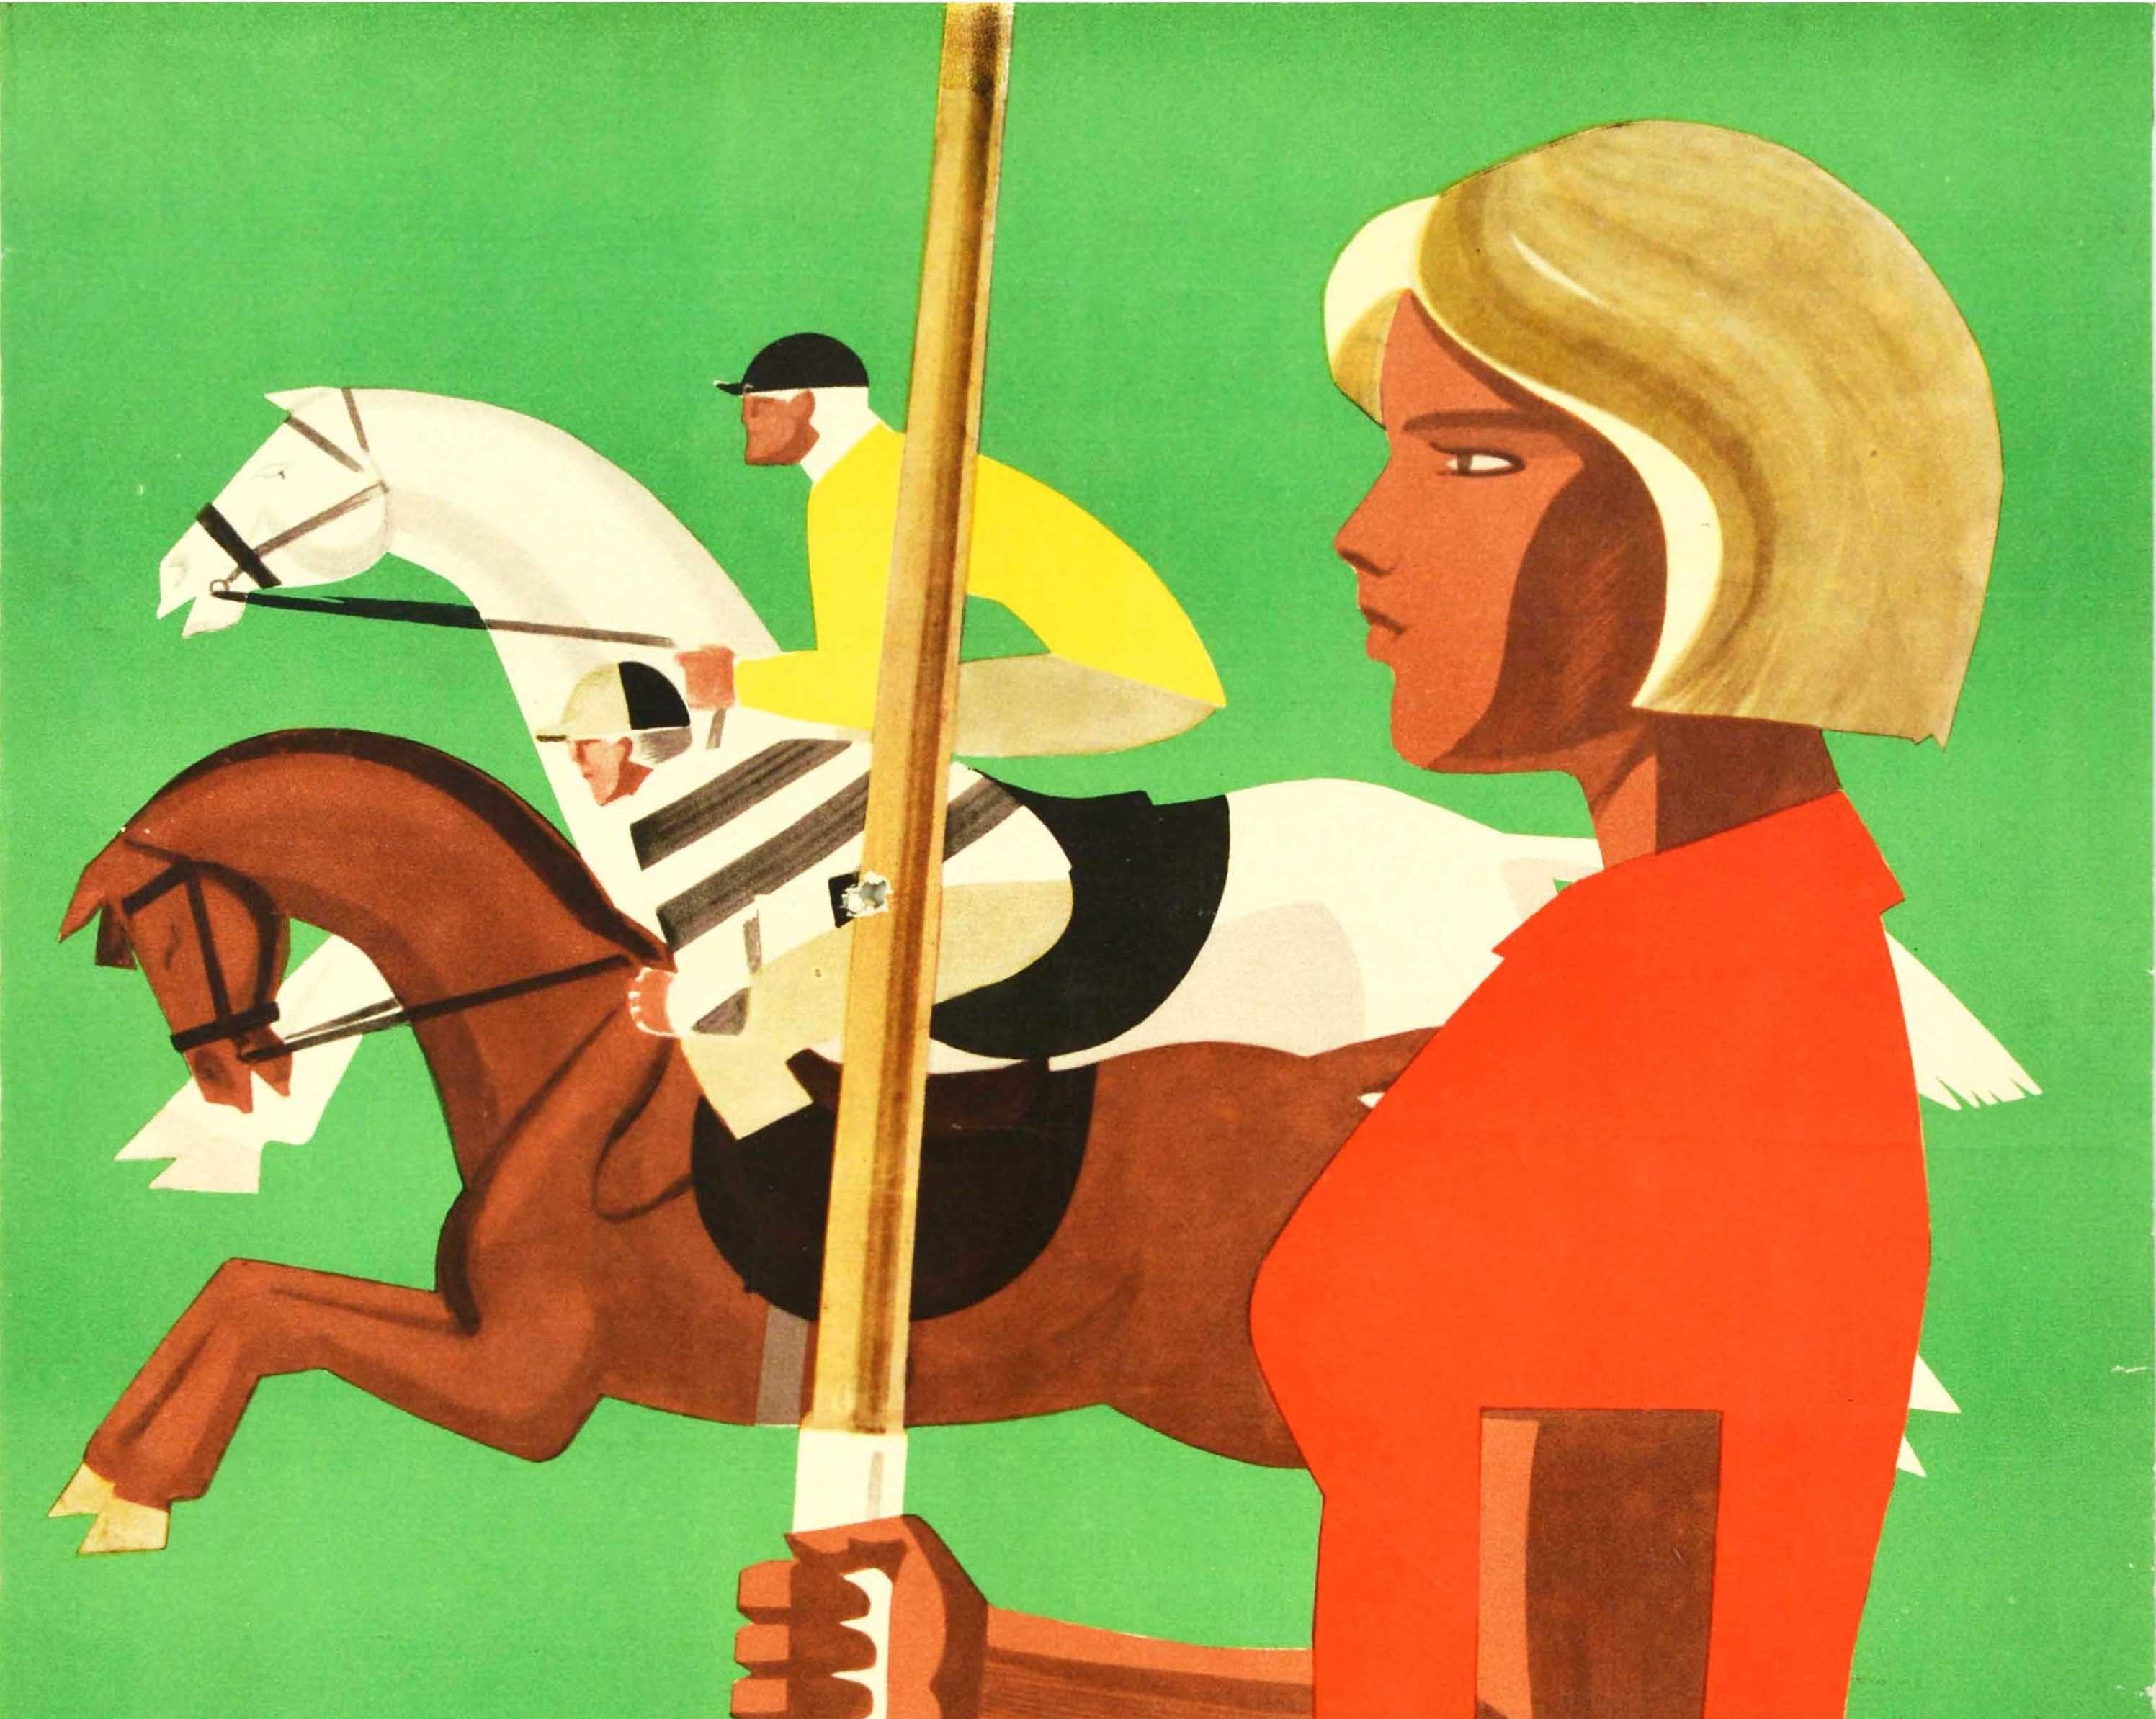 Original vintage Soviet sport poster - Under the banners of sports societies / ??? ??????? ?????????? ??????? - featuring a stylised illustration of an athlete holding a javelin in front of a jockey in a striped top racing a horse and a show jumper